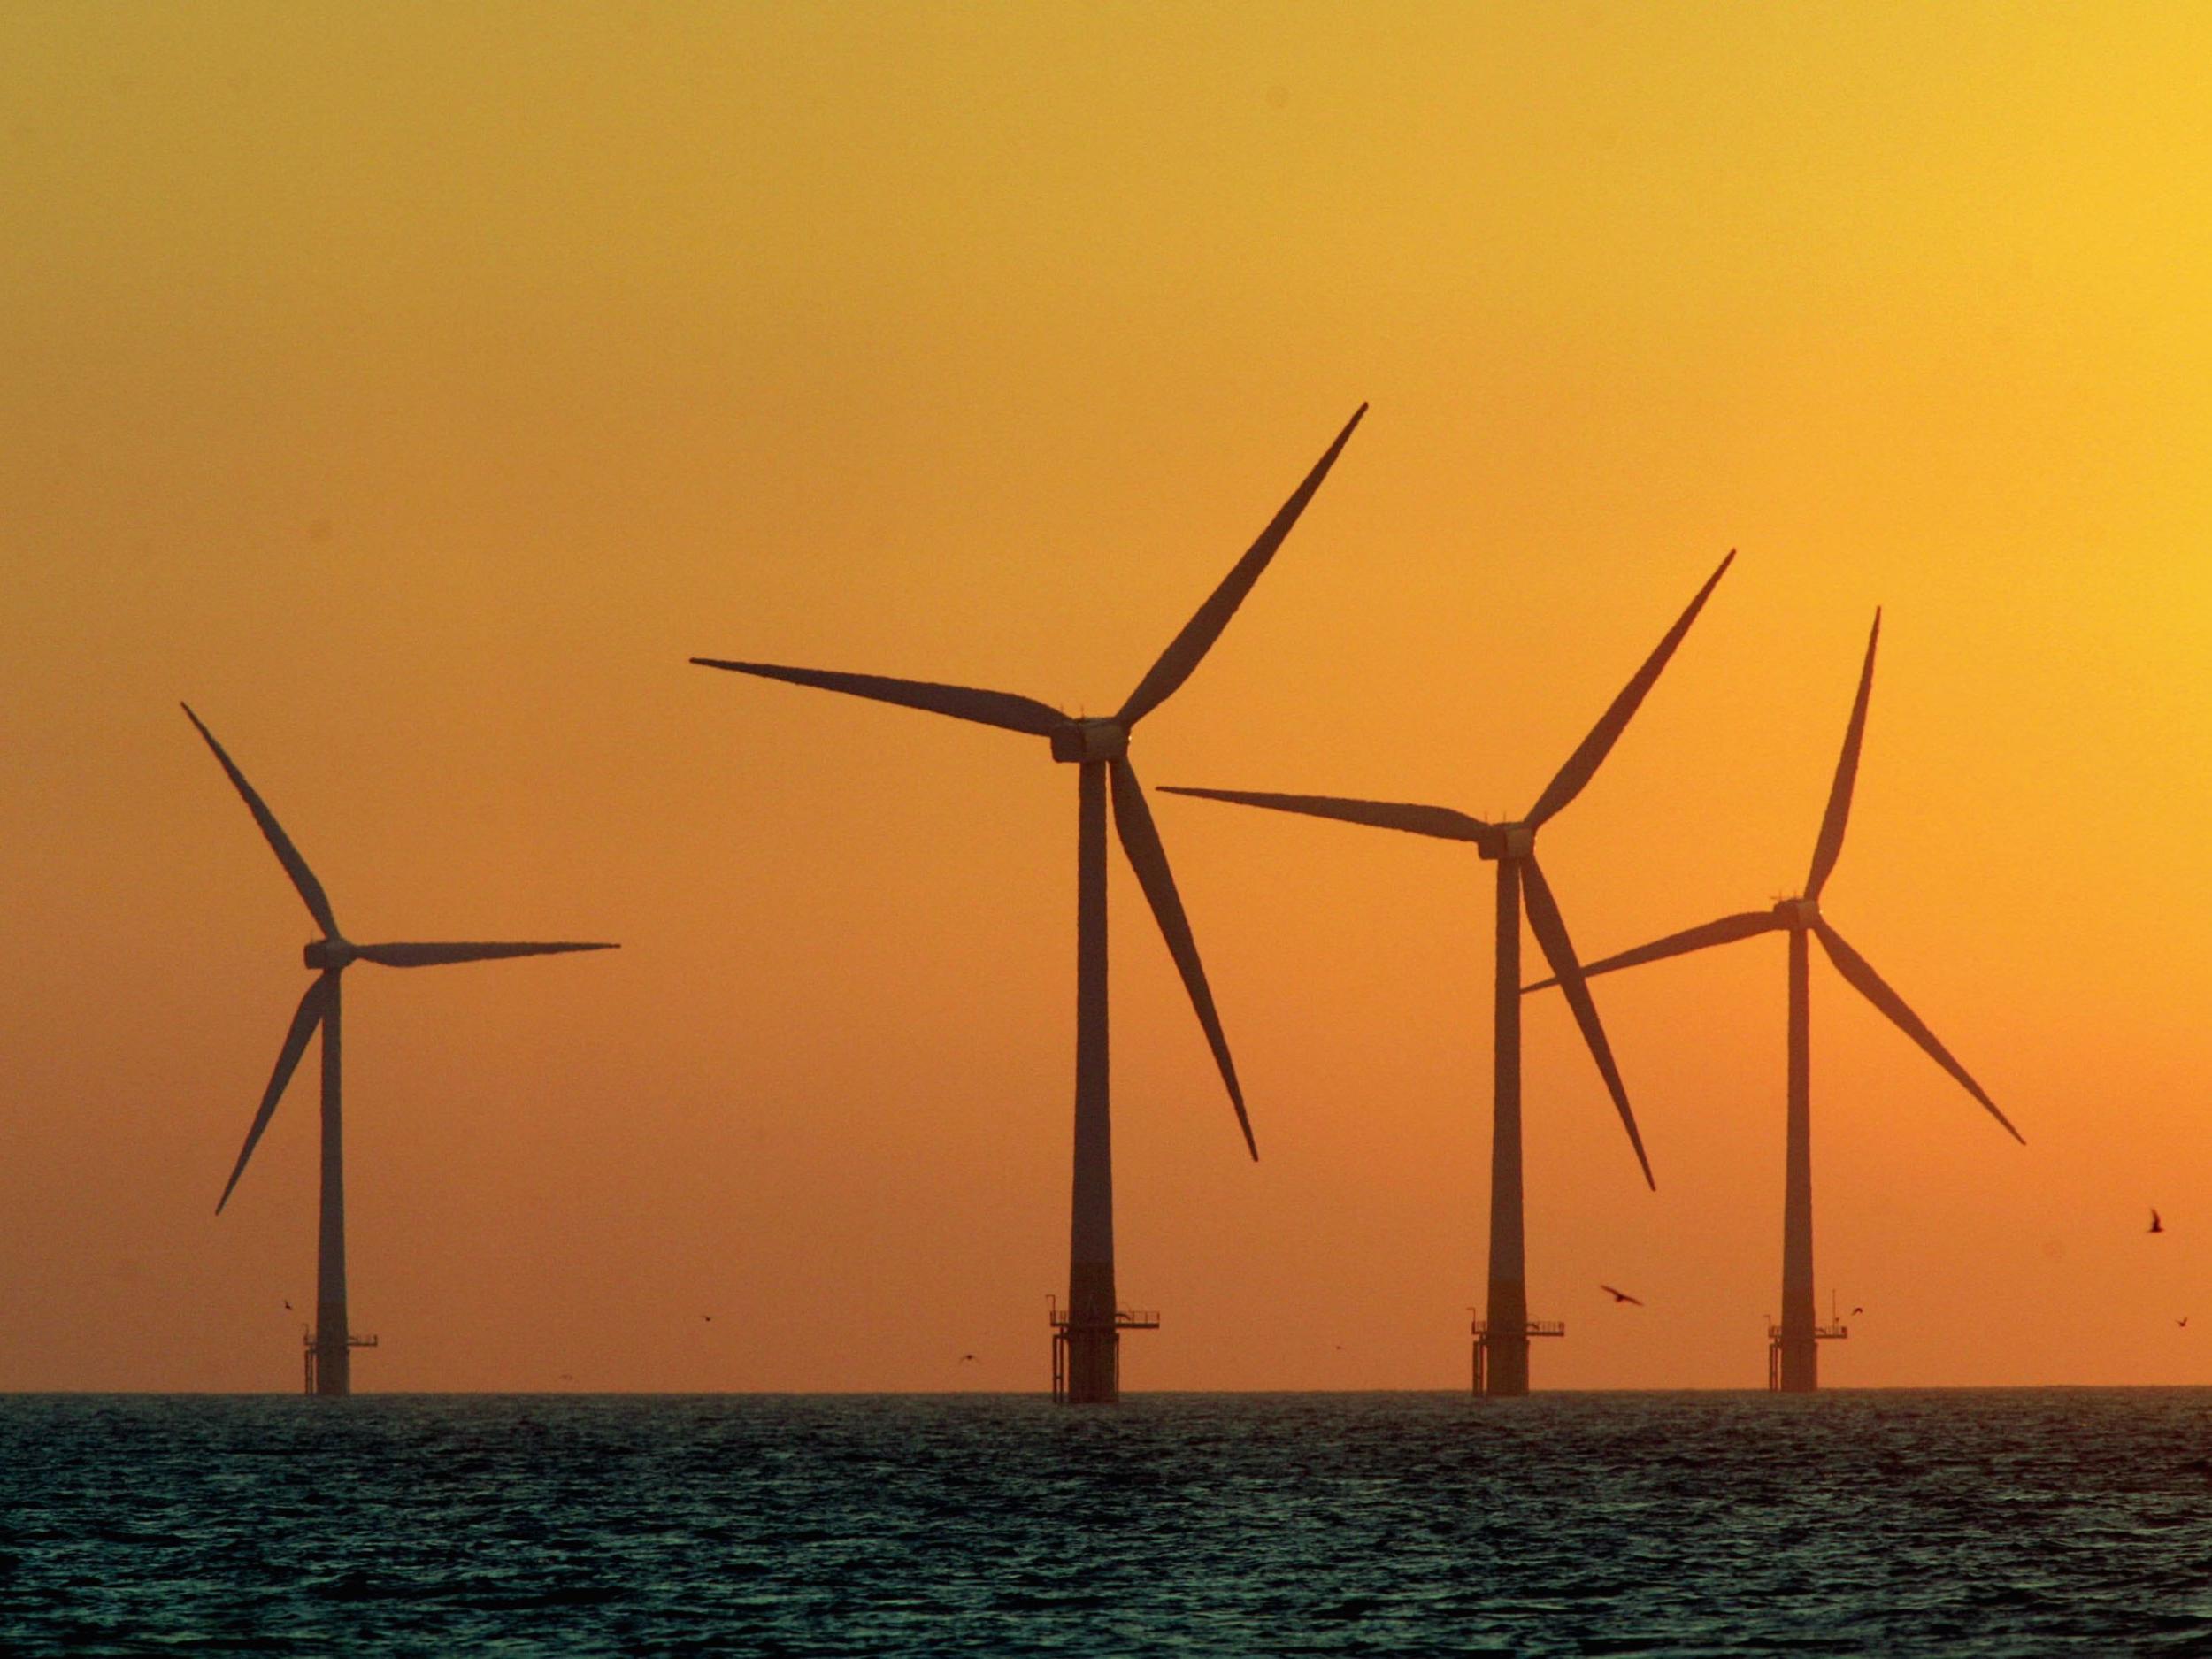 Investment in UK wind power accounts for much of the boost in low-carbon electricity